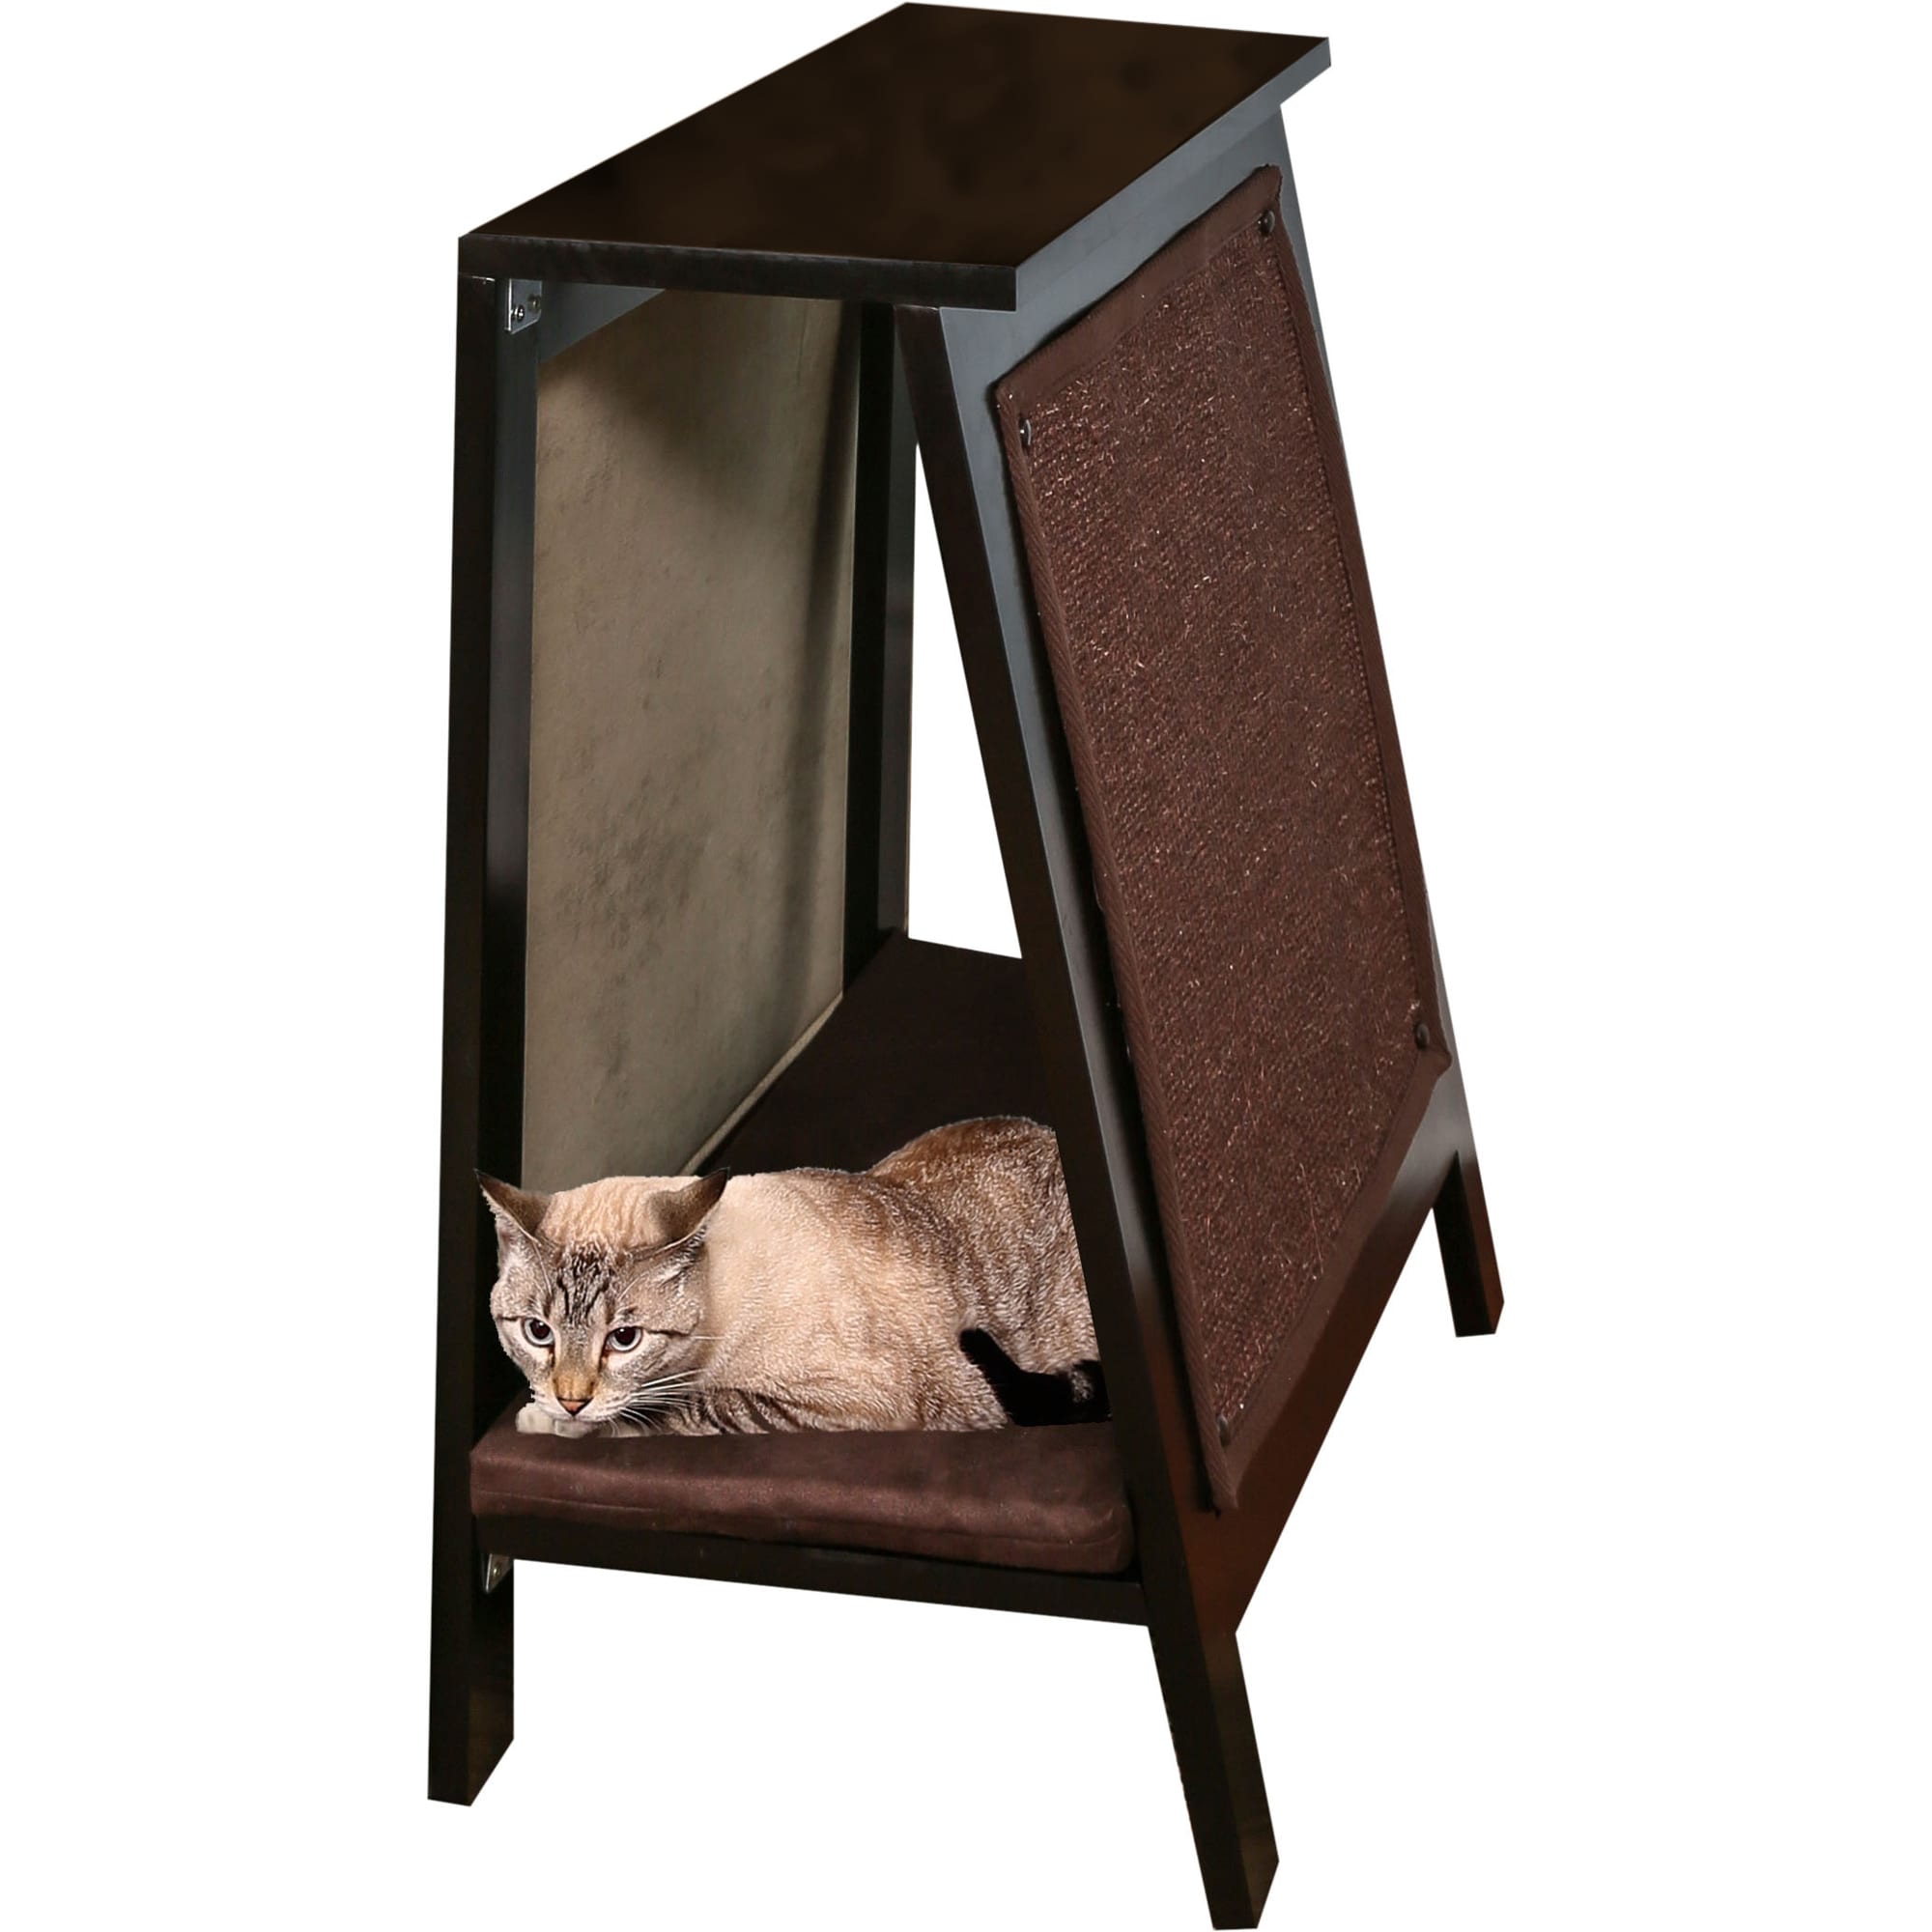 The Refined Feline Ain Frame Cat Bed In Espresso